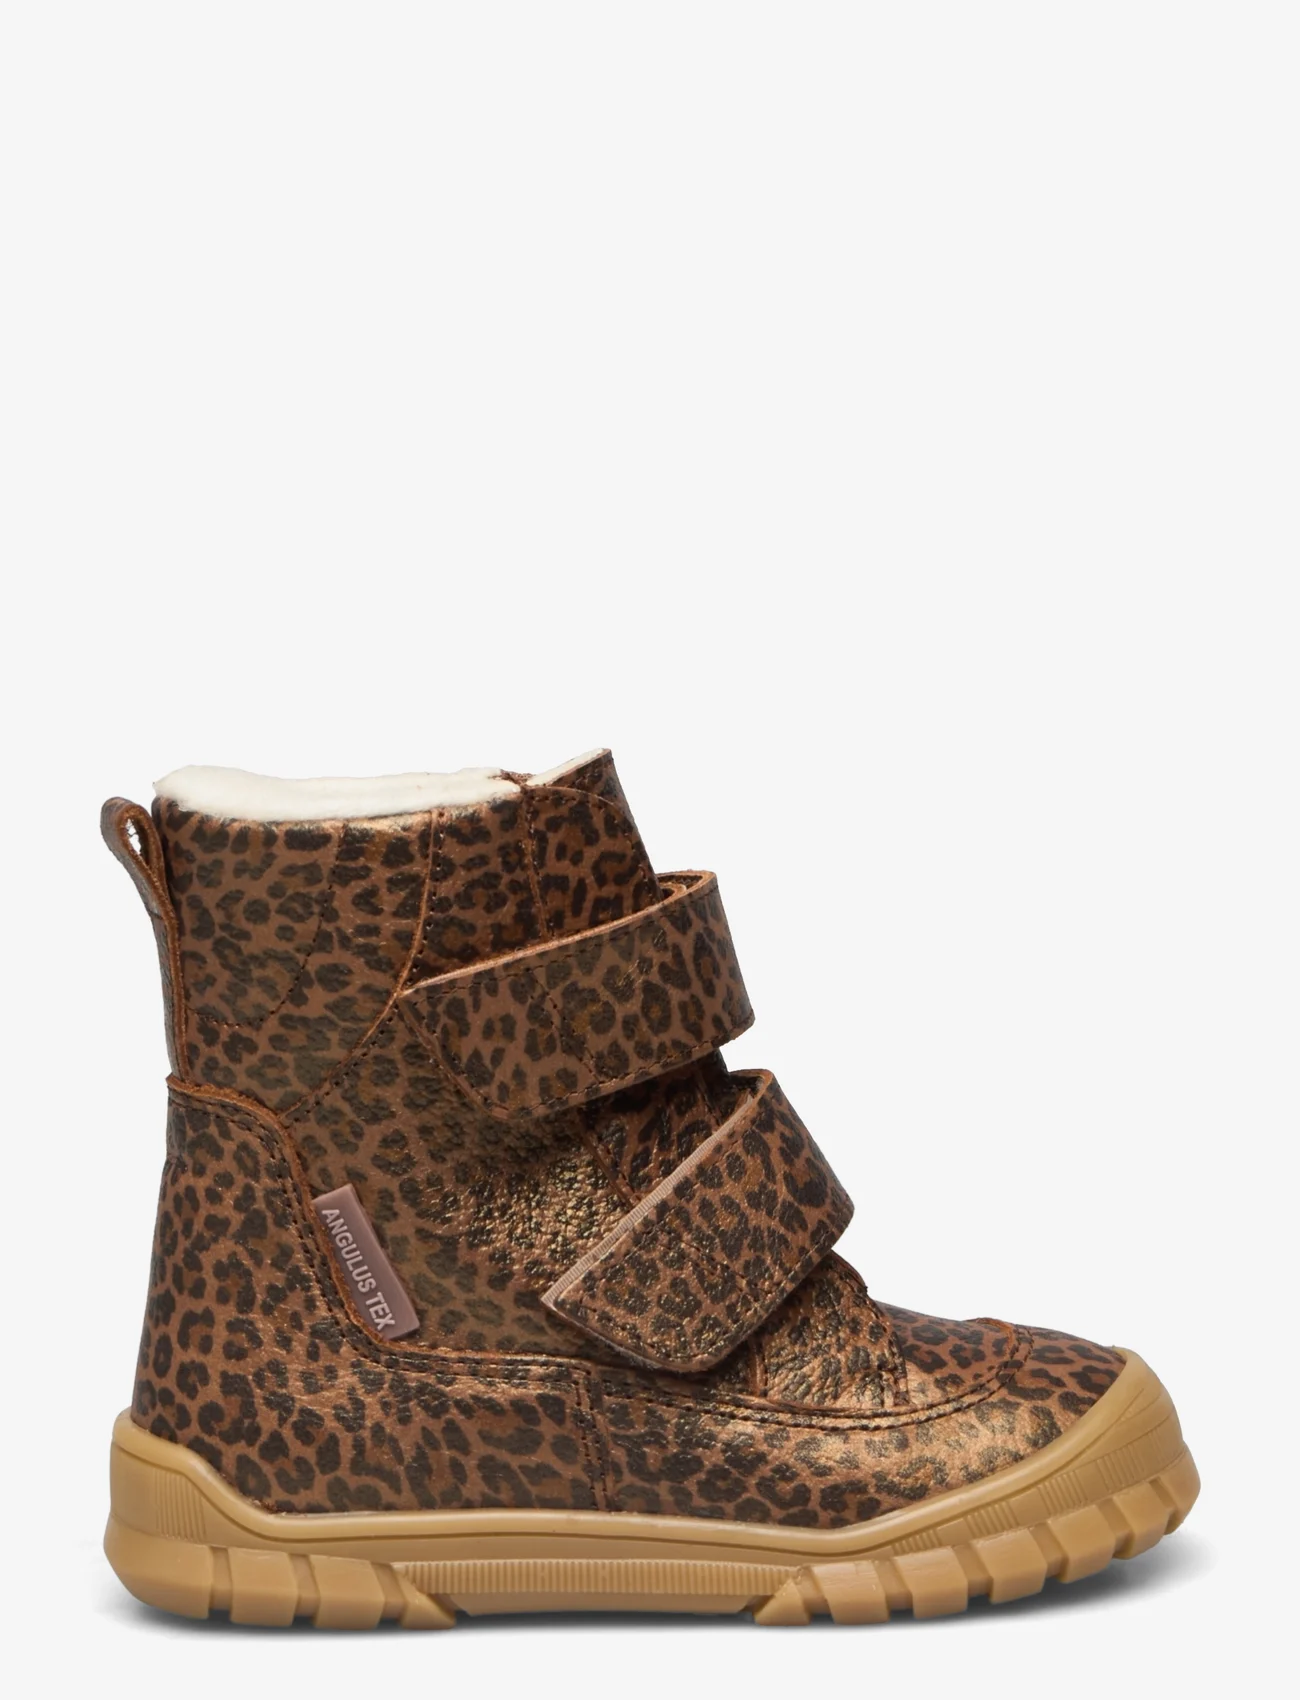 ANGULUS - Boots - flat - with velcro - børn - 2162 brown leopard - 1